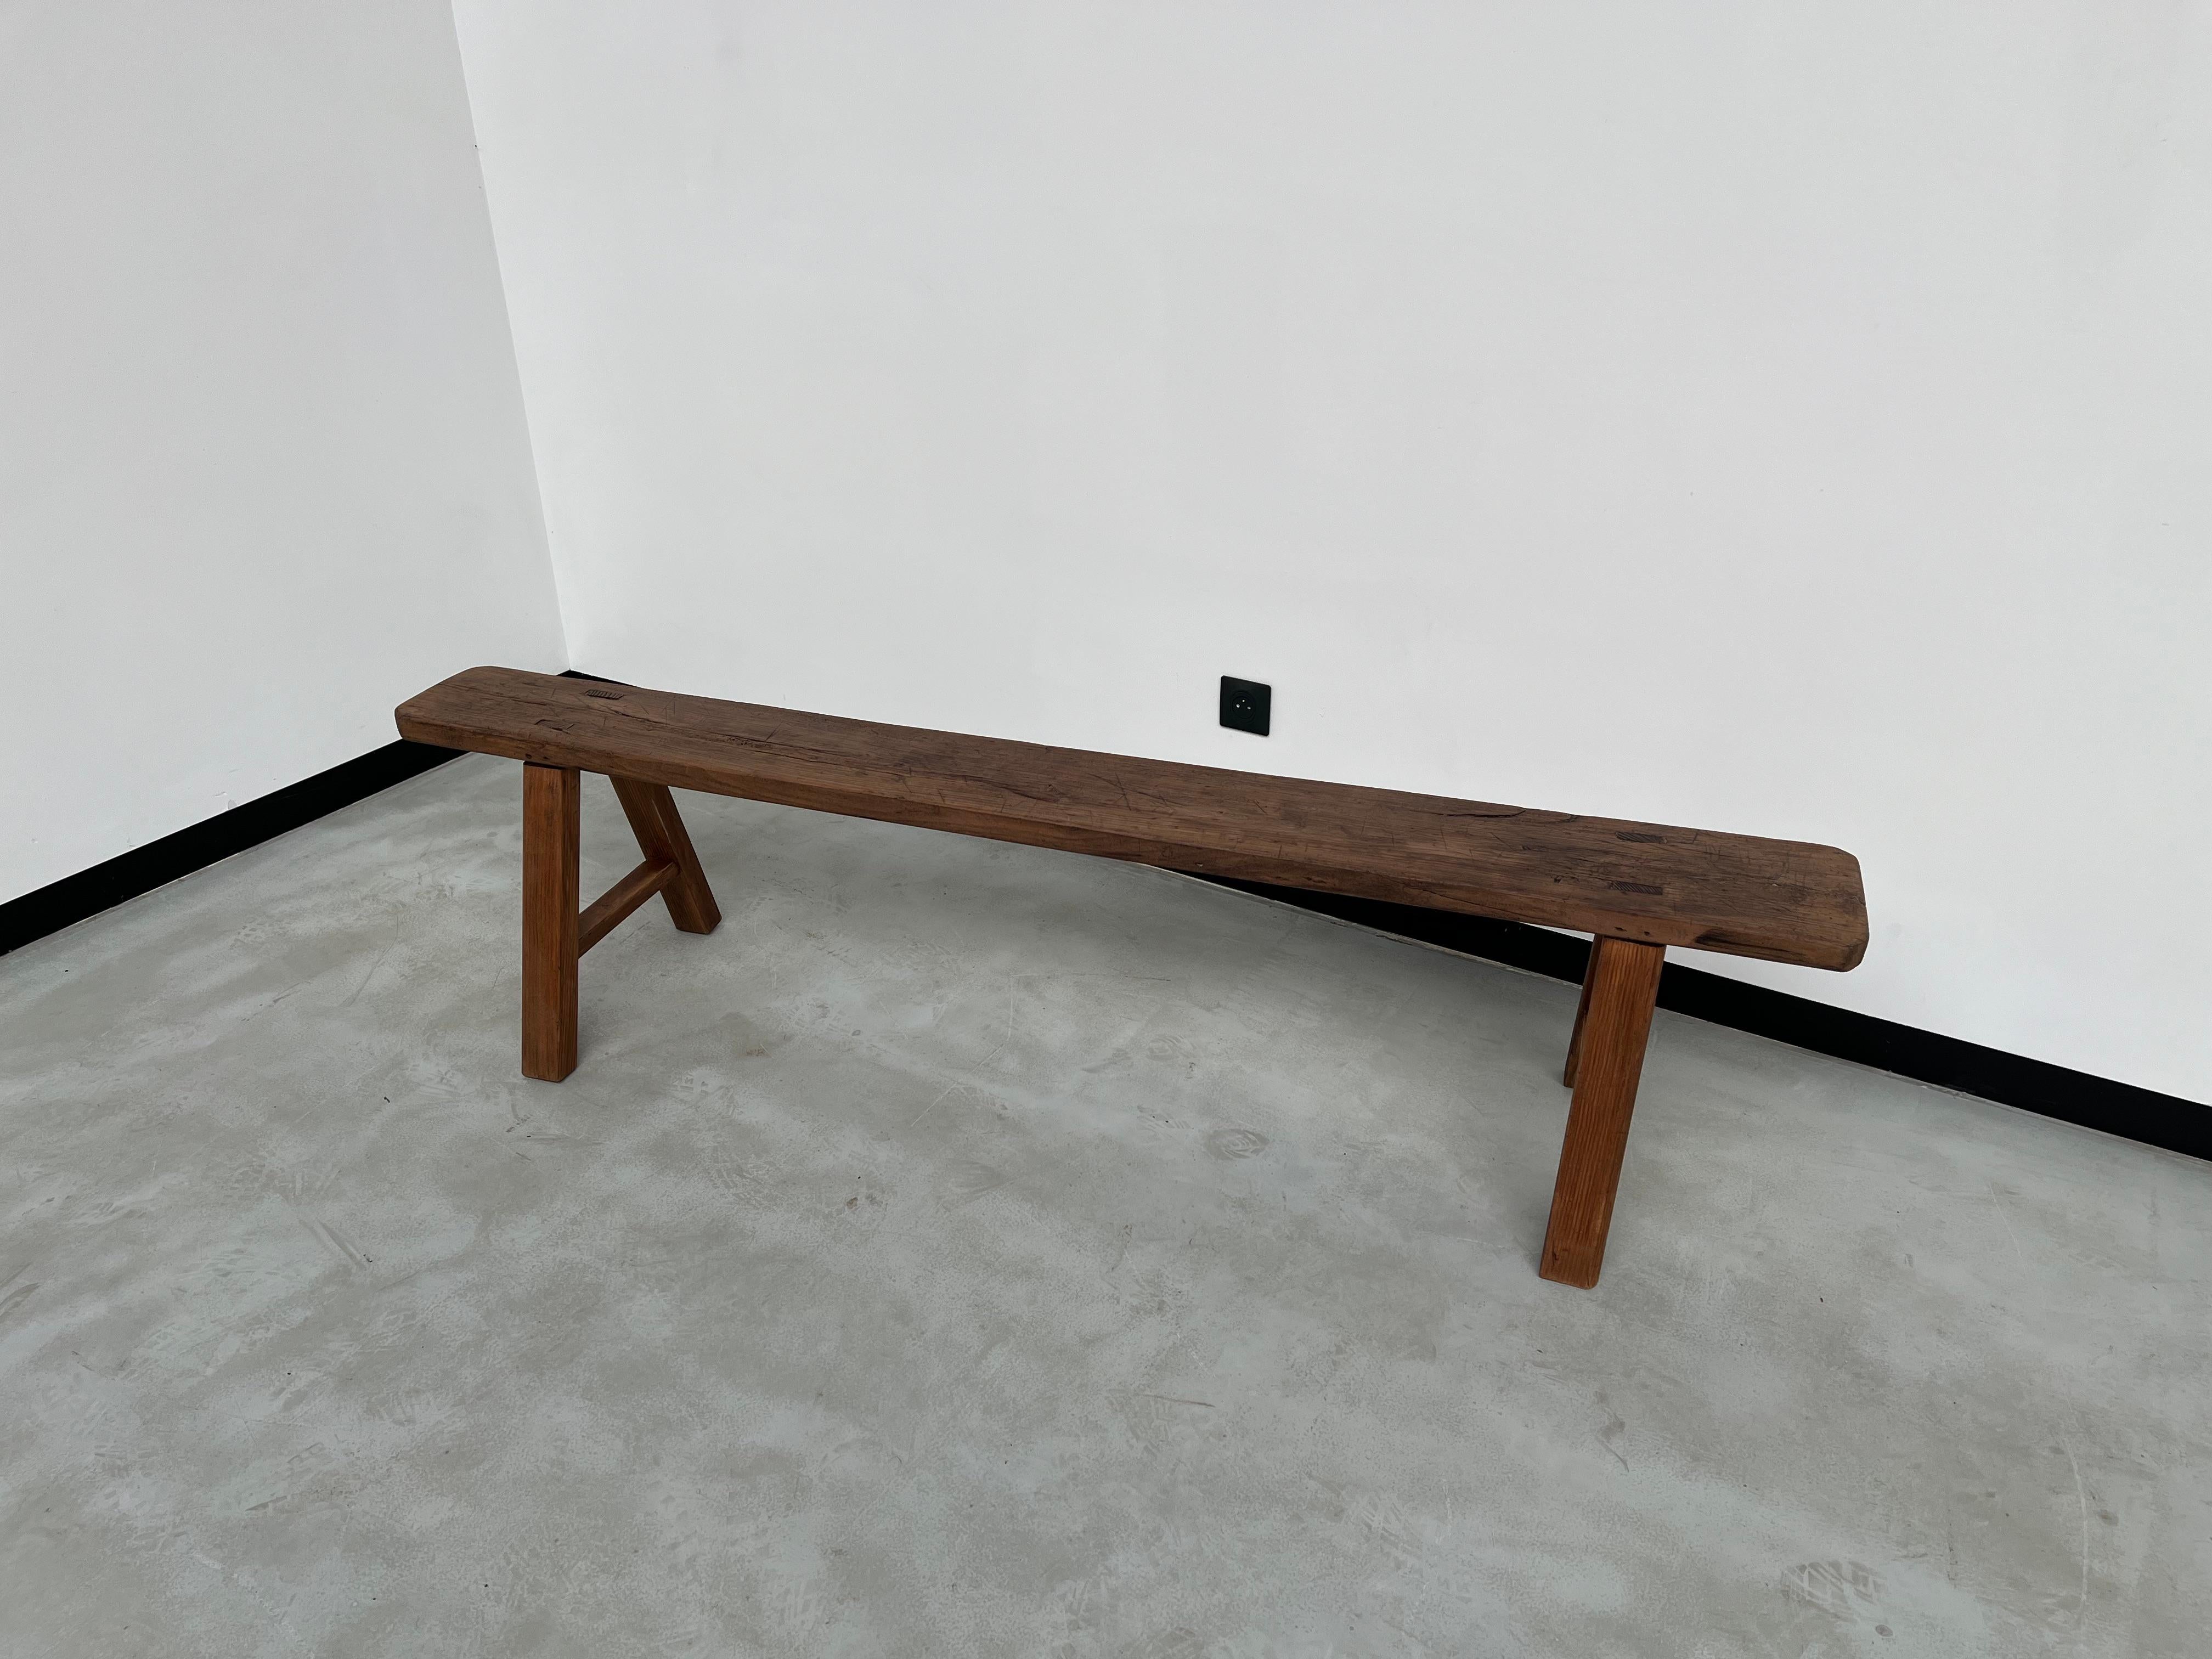 Maison Lecan offers you this fully restored and varnished farm bench. From the 50s, it has a pretty veining and will fit perfectly into many interior decorations. Note that its legs are made of solid acacia and were replaced in the past by the